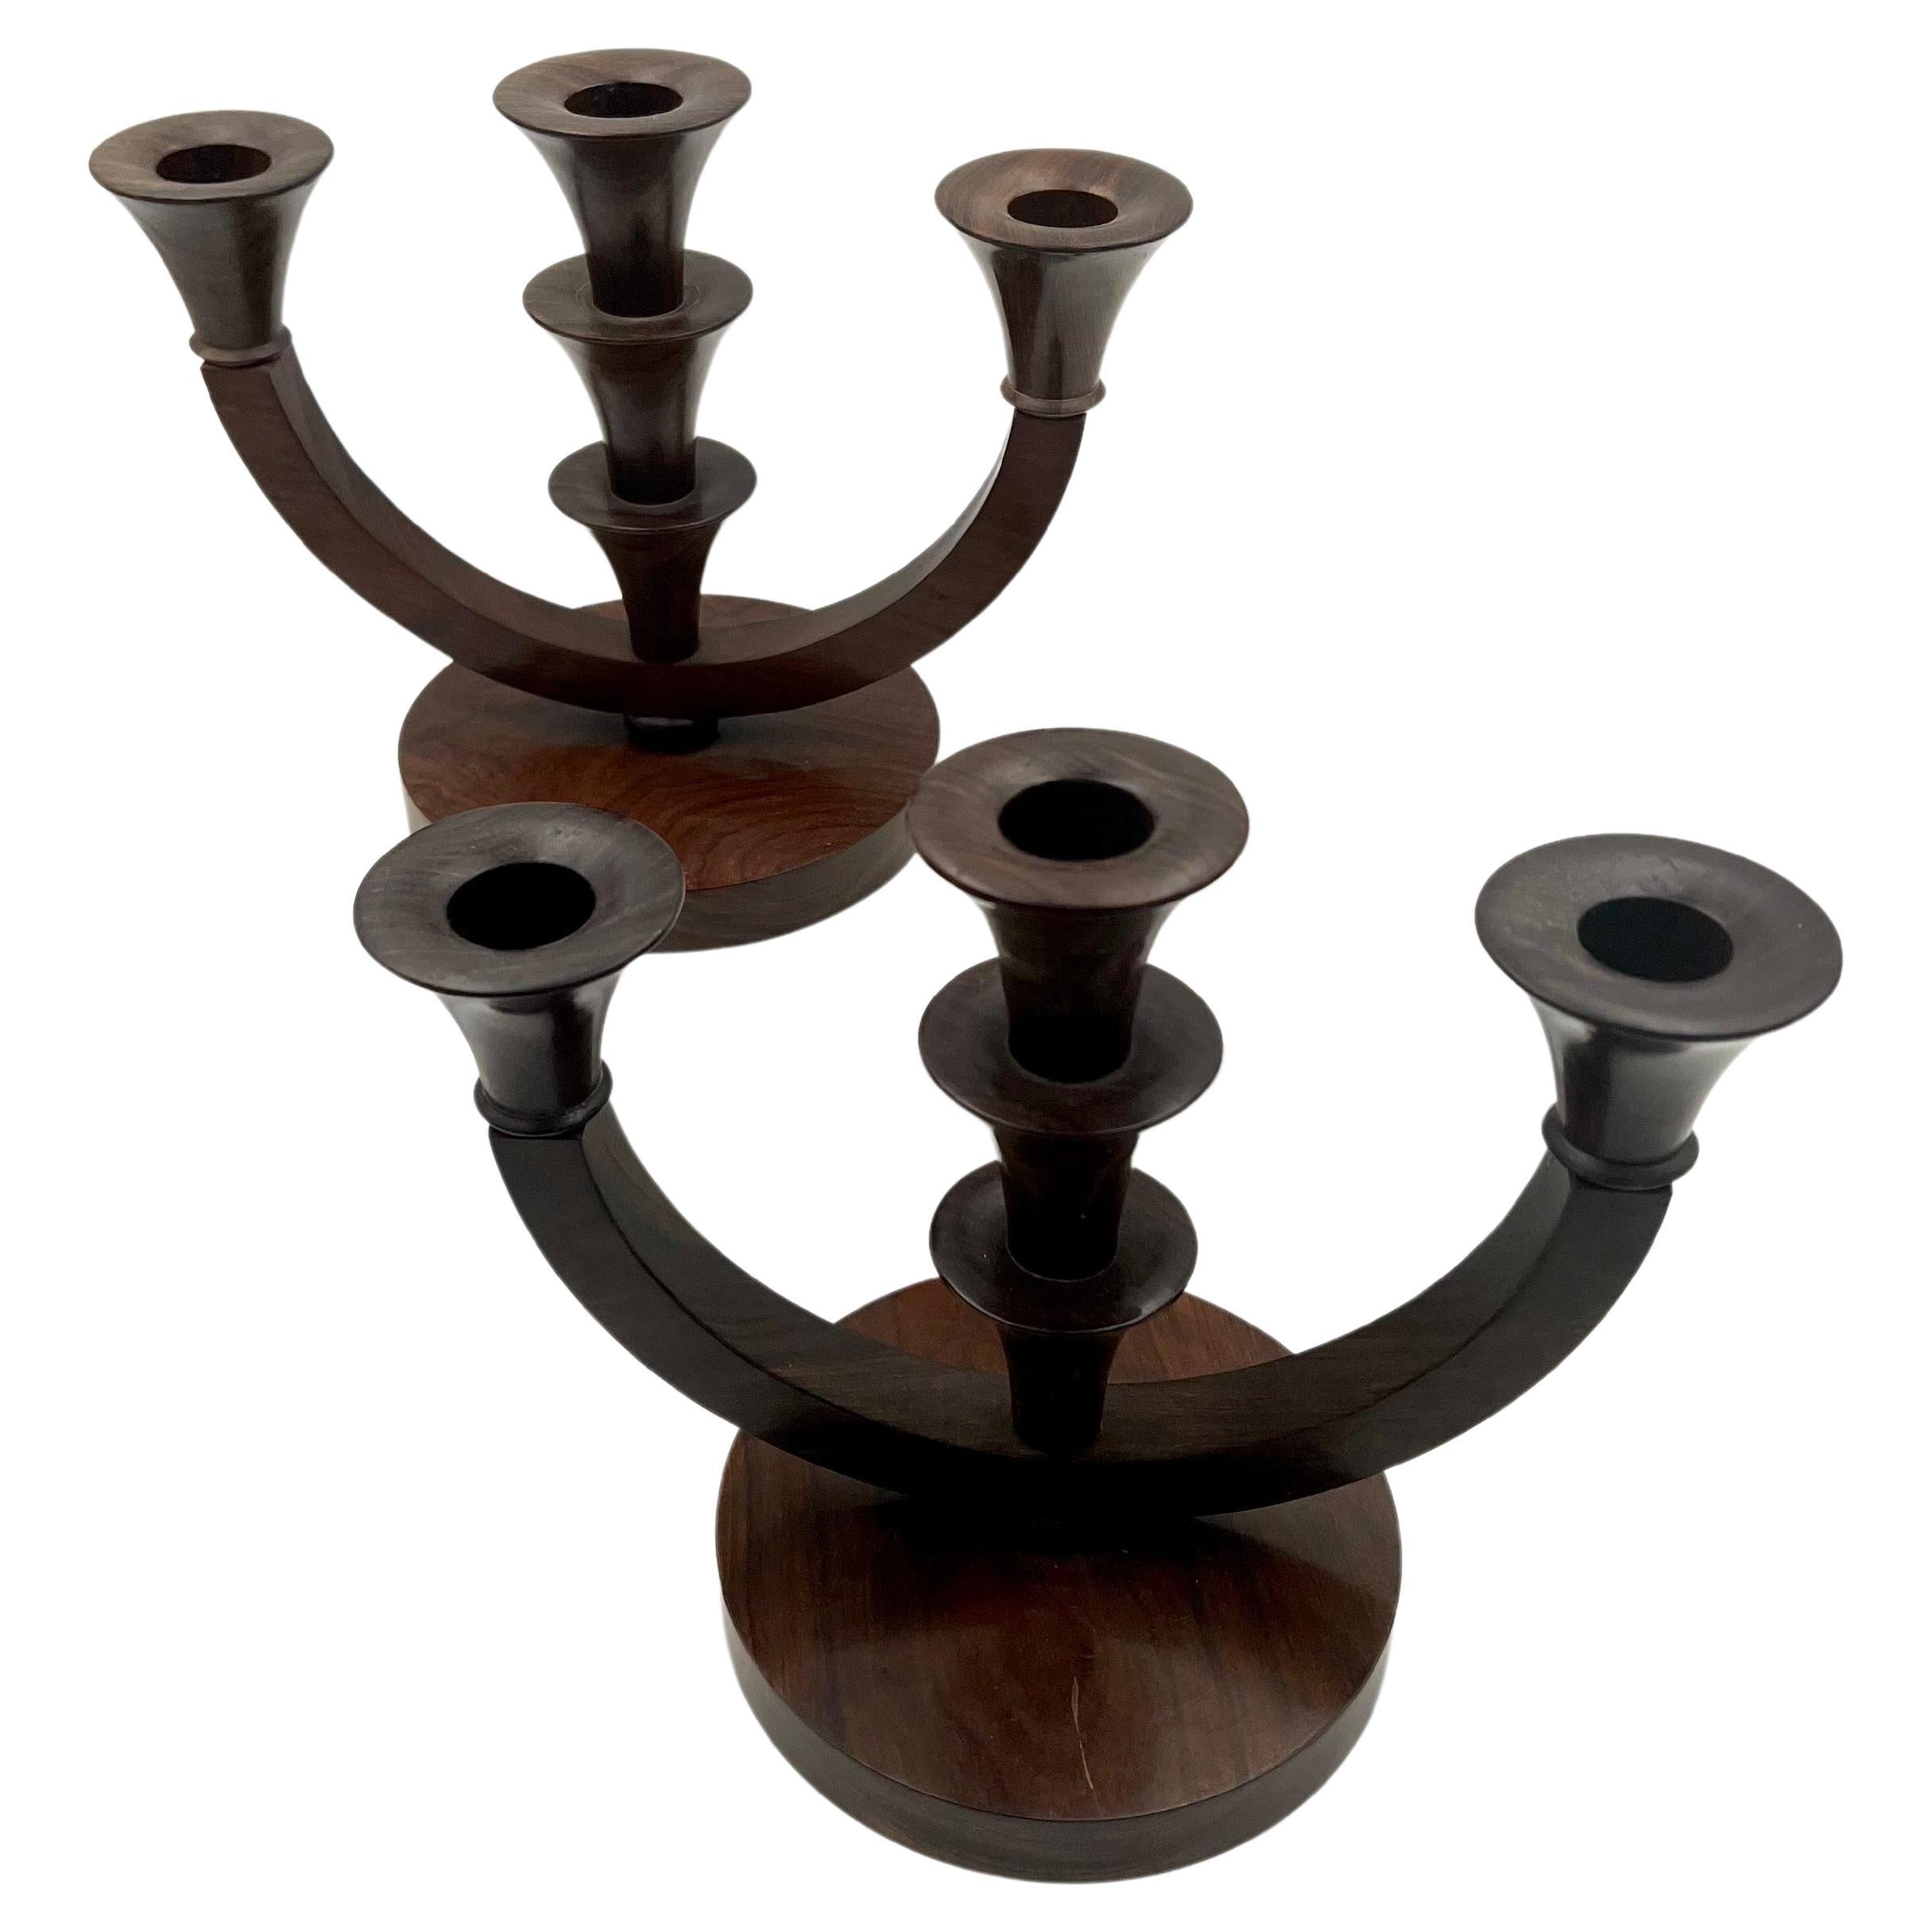 Beautiful pair of solid olive tree wood, with walnut stain candle holders made in Africa, circa 1970s.